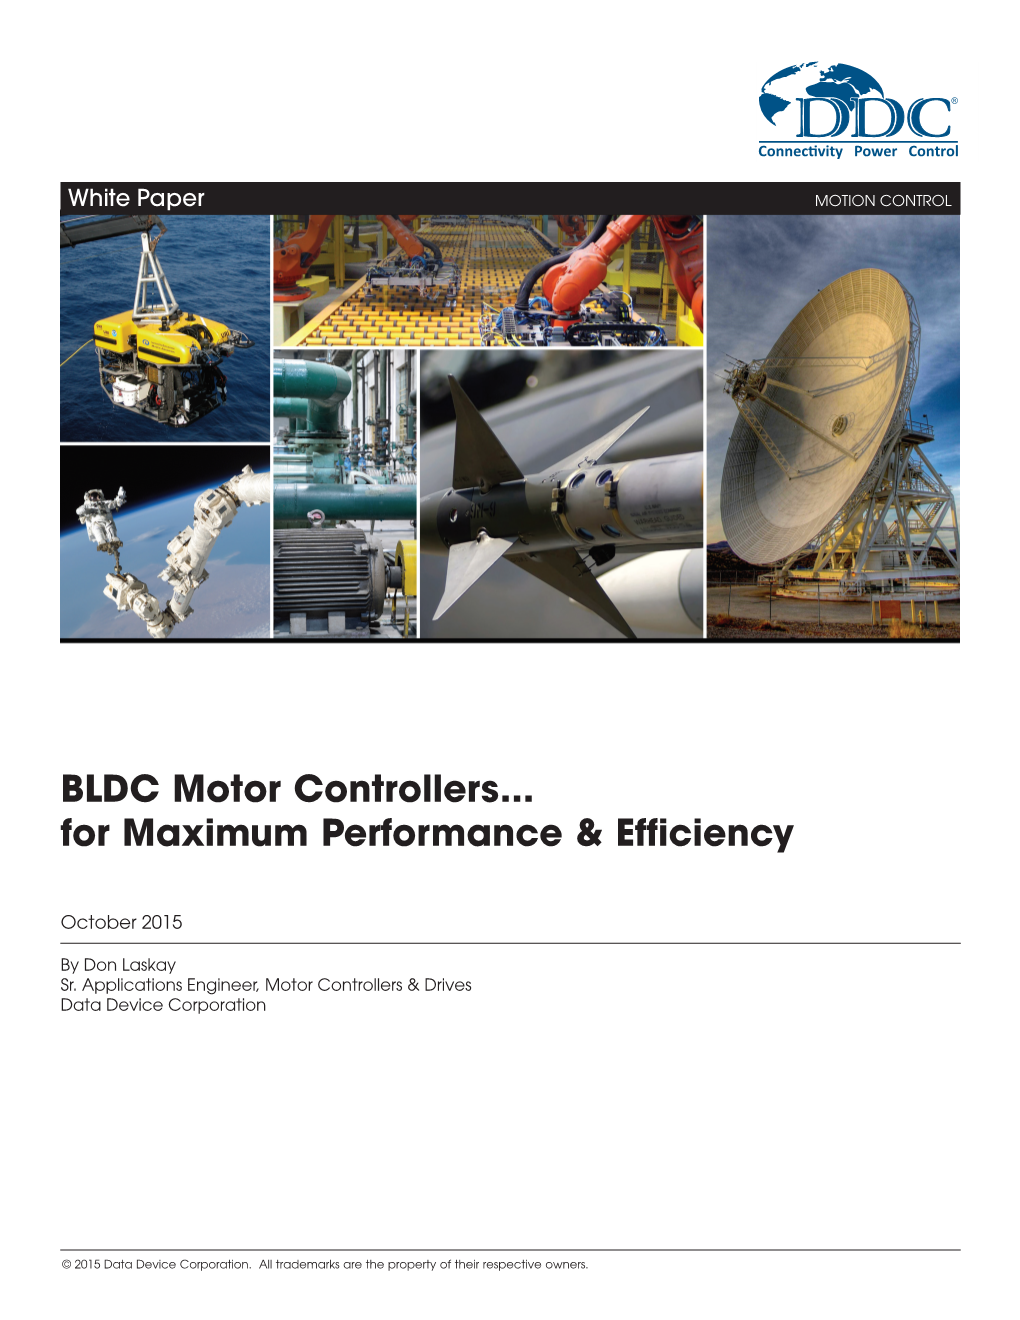 BLDC Motor Controllers...For Maximum Performance & Efficiency